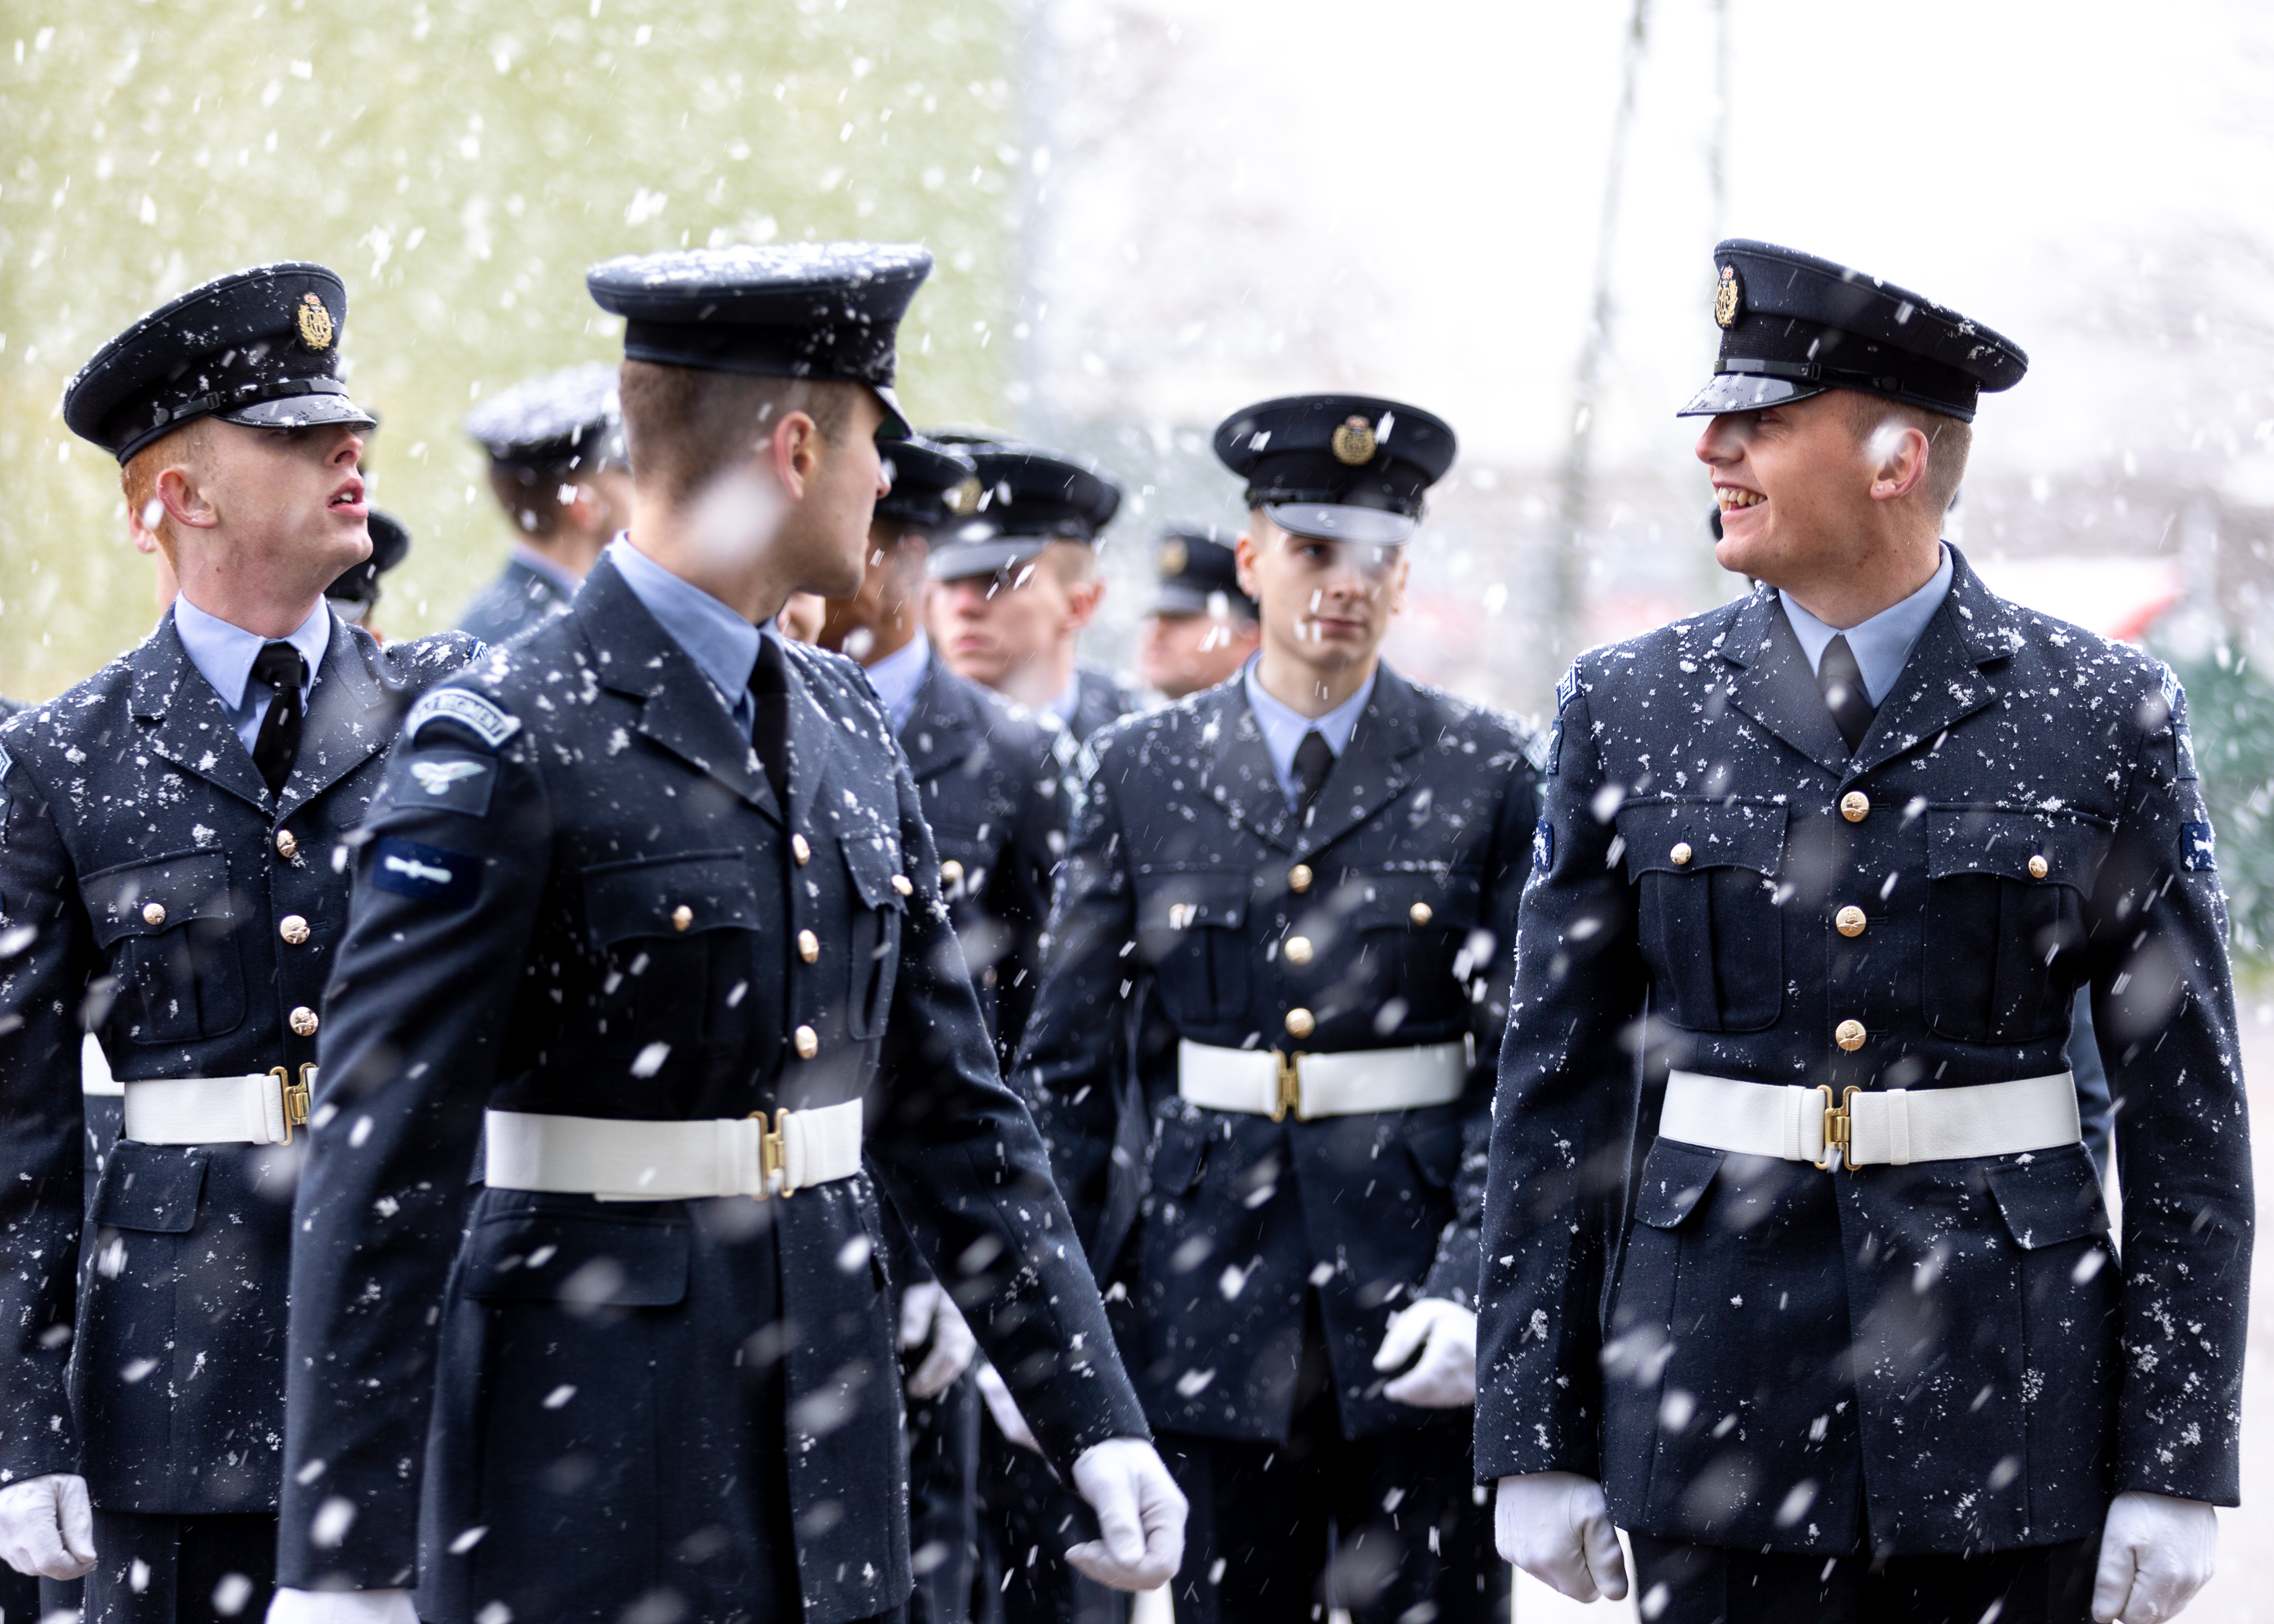 Graduates finish their parade just in time as the wintry showers increase